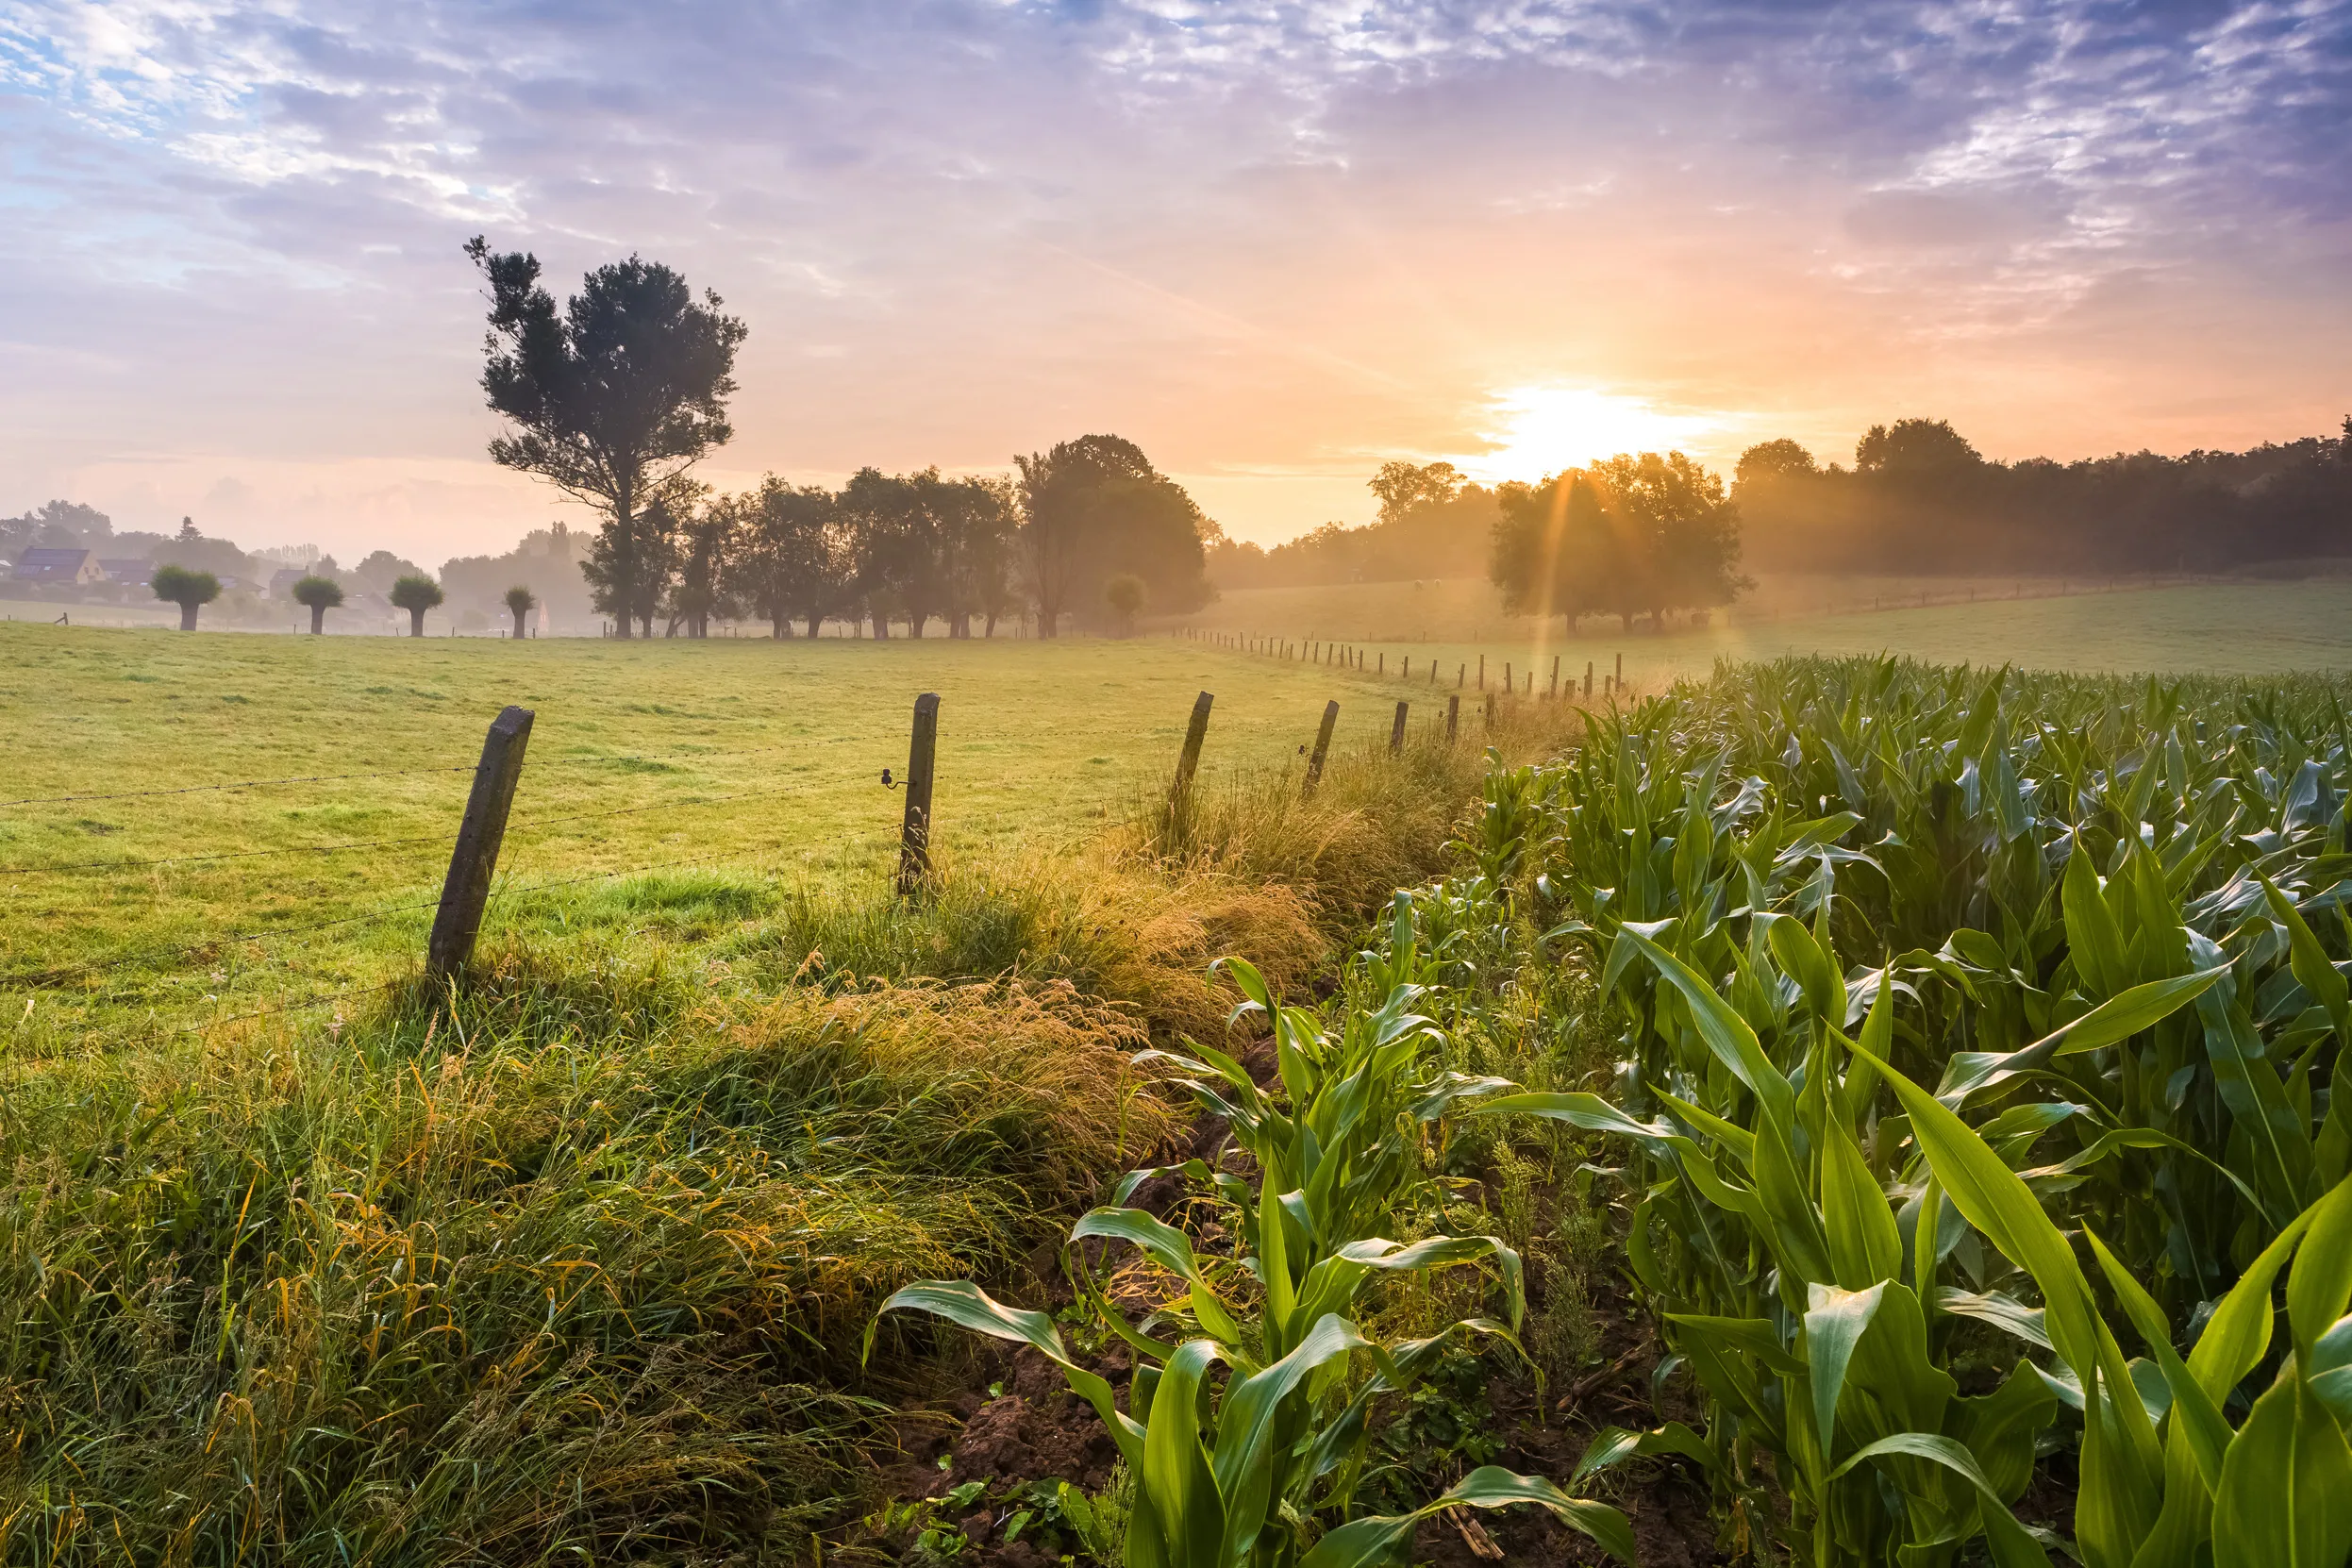 Sunrise over a landscape of green crops and grasses.